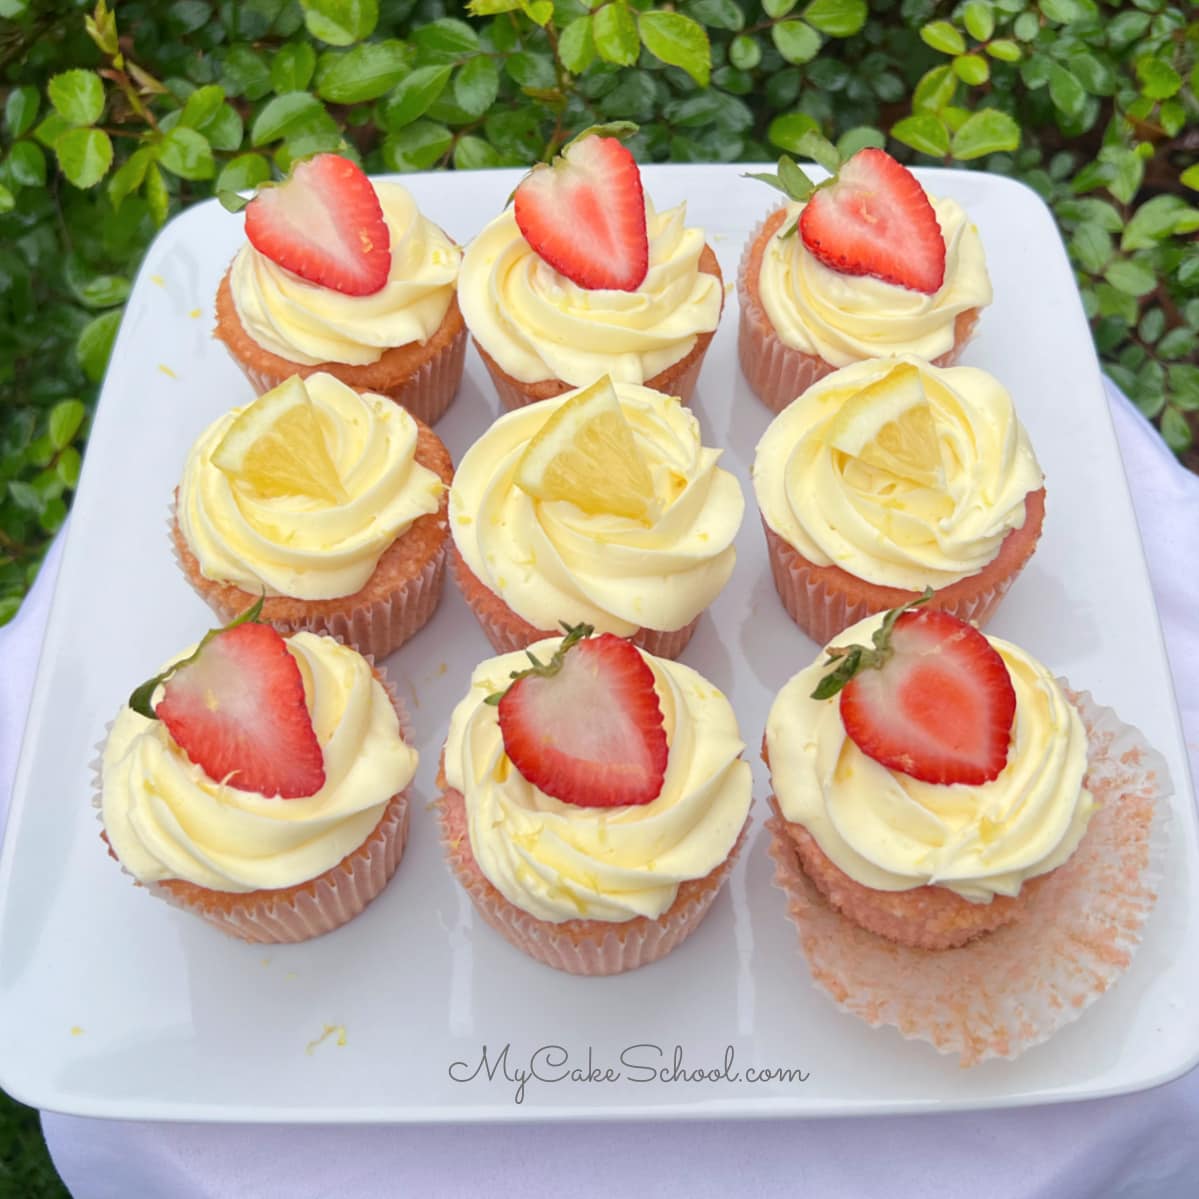 Strawberry lemonade cupcakes on a platter, topped with swirls of lemon whipped cream cheese frosting and topped with sliced strawberries and lemons.